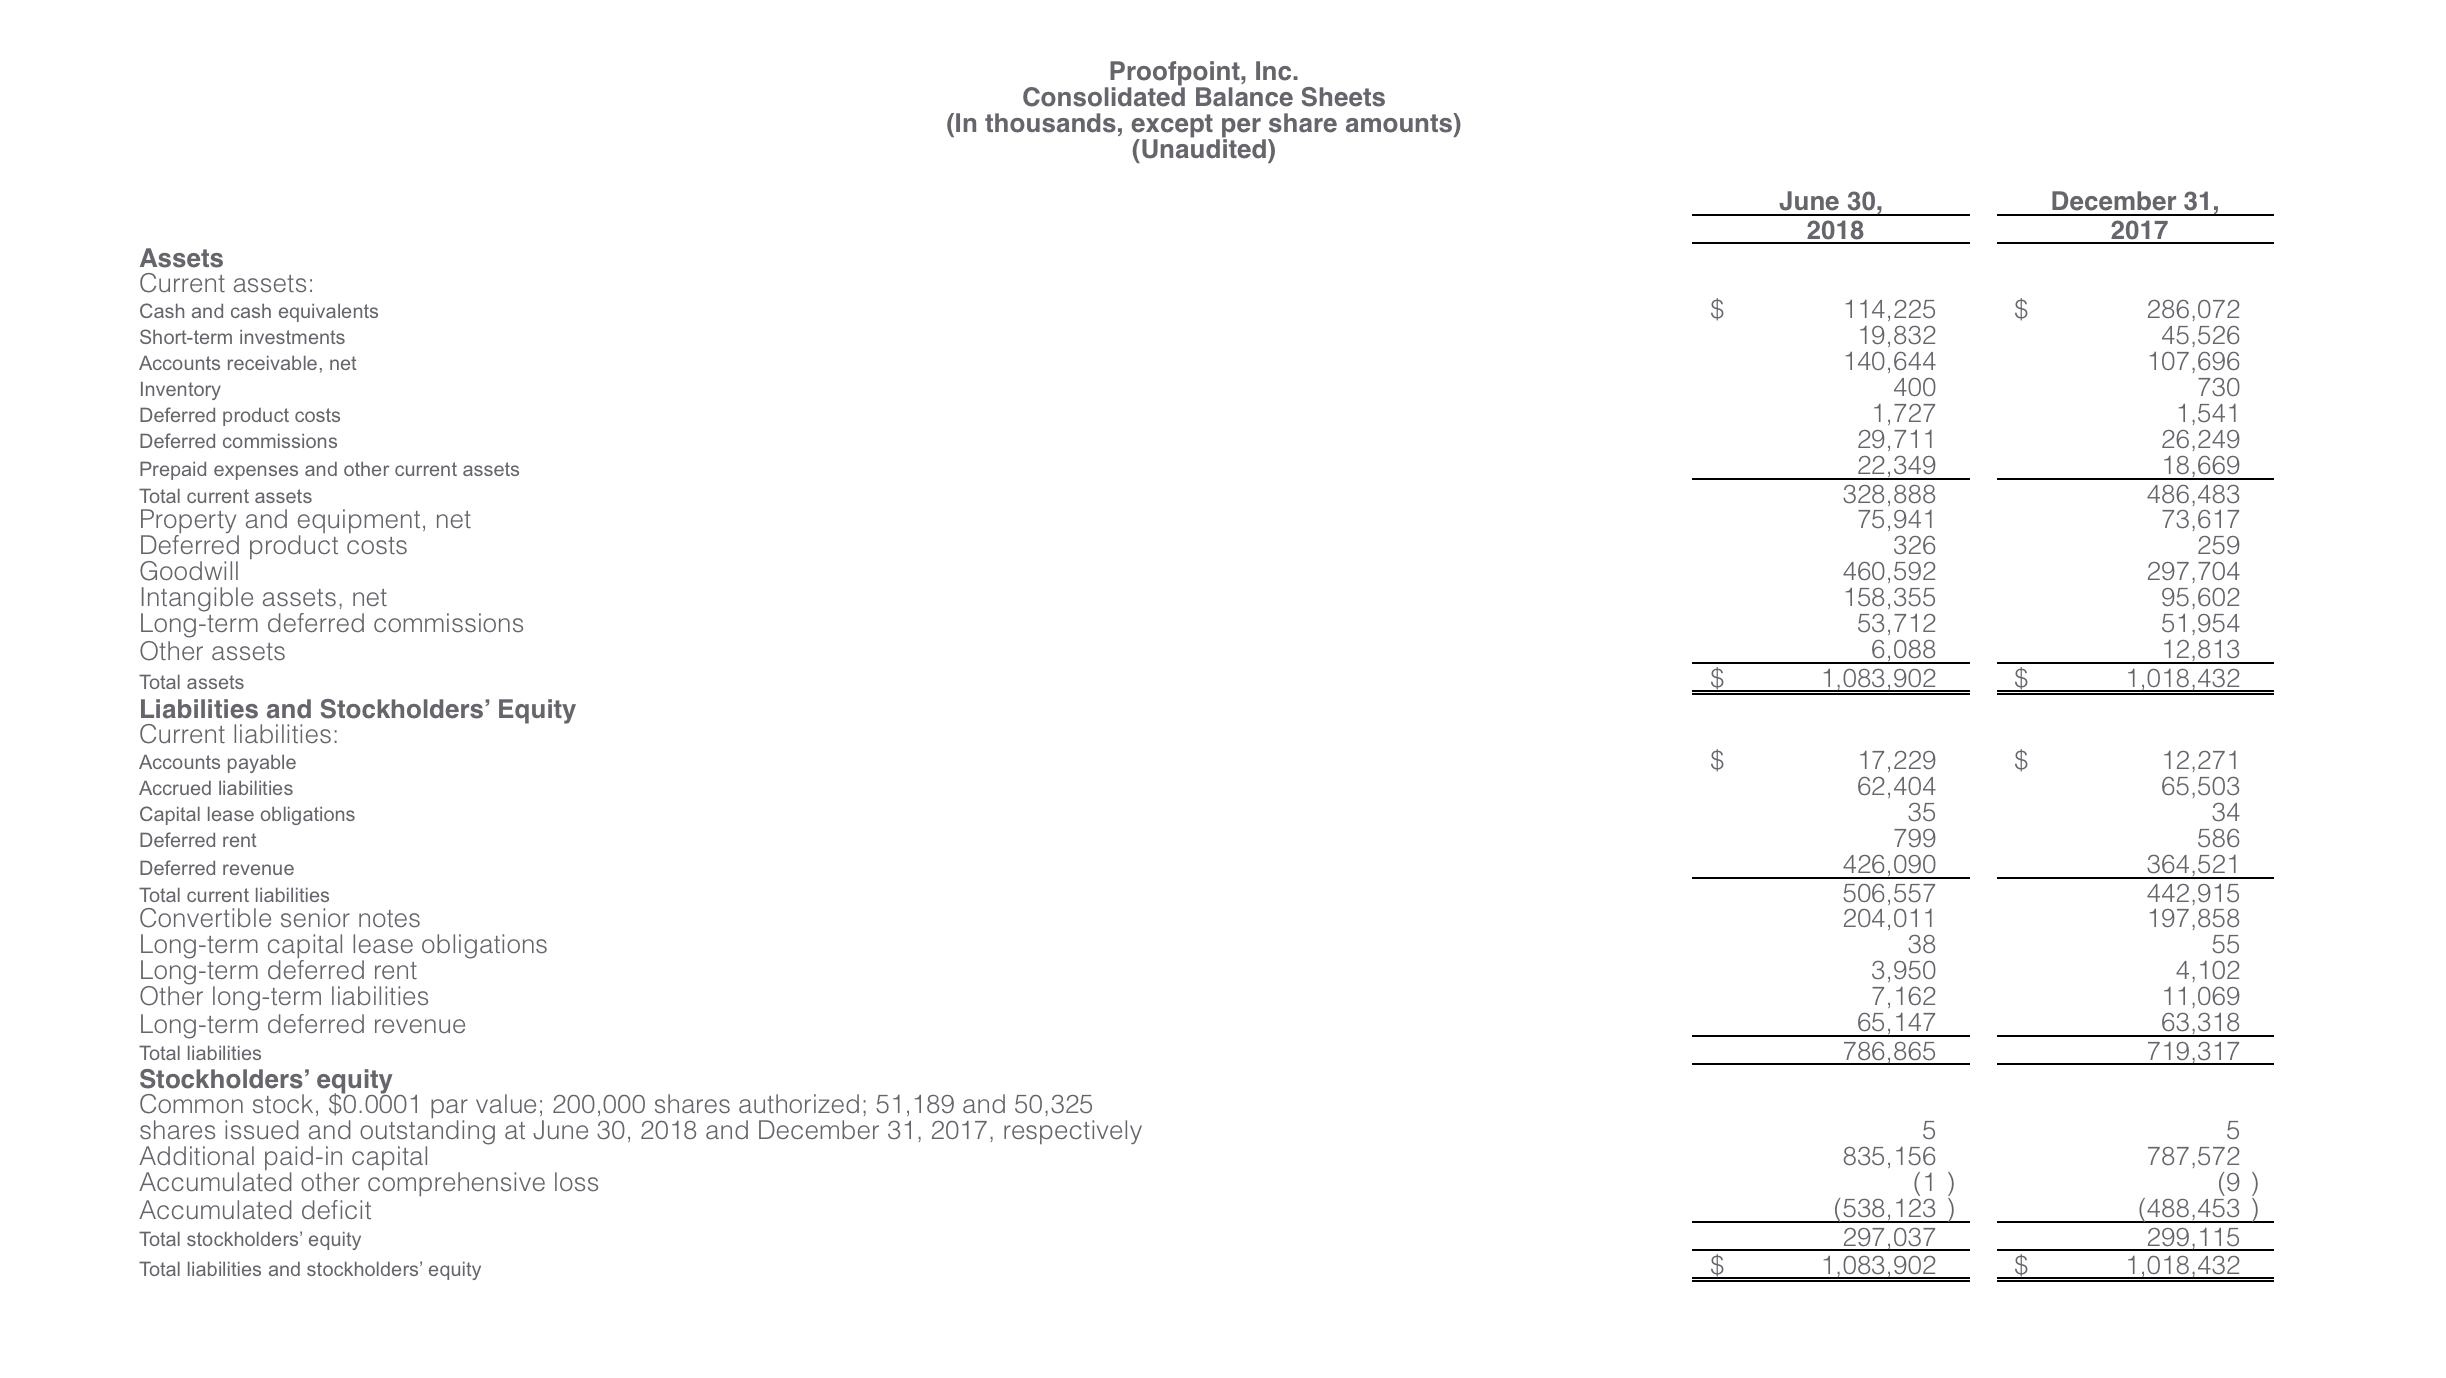 Proofpoint consolidated balance sheet report